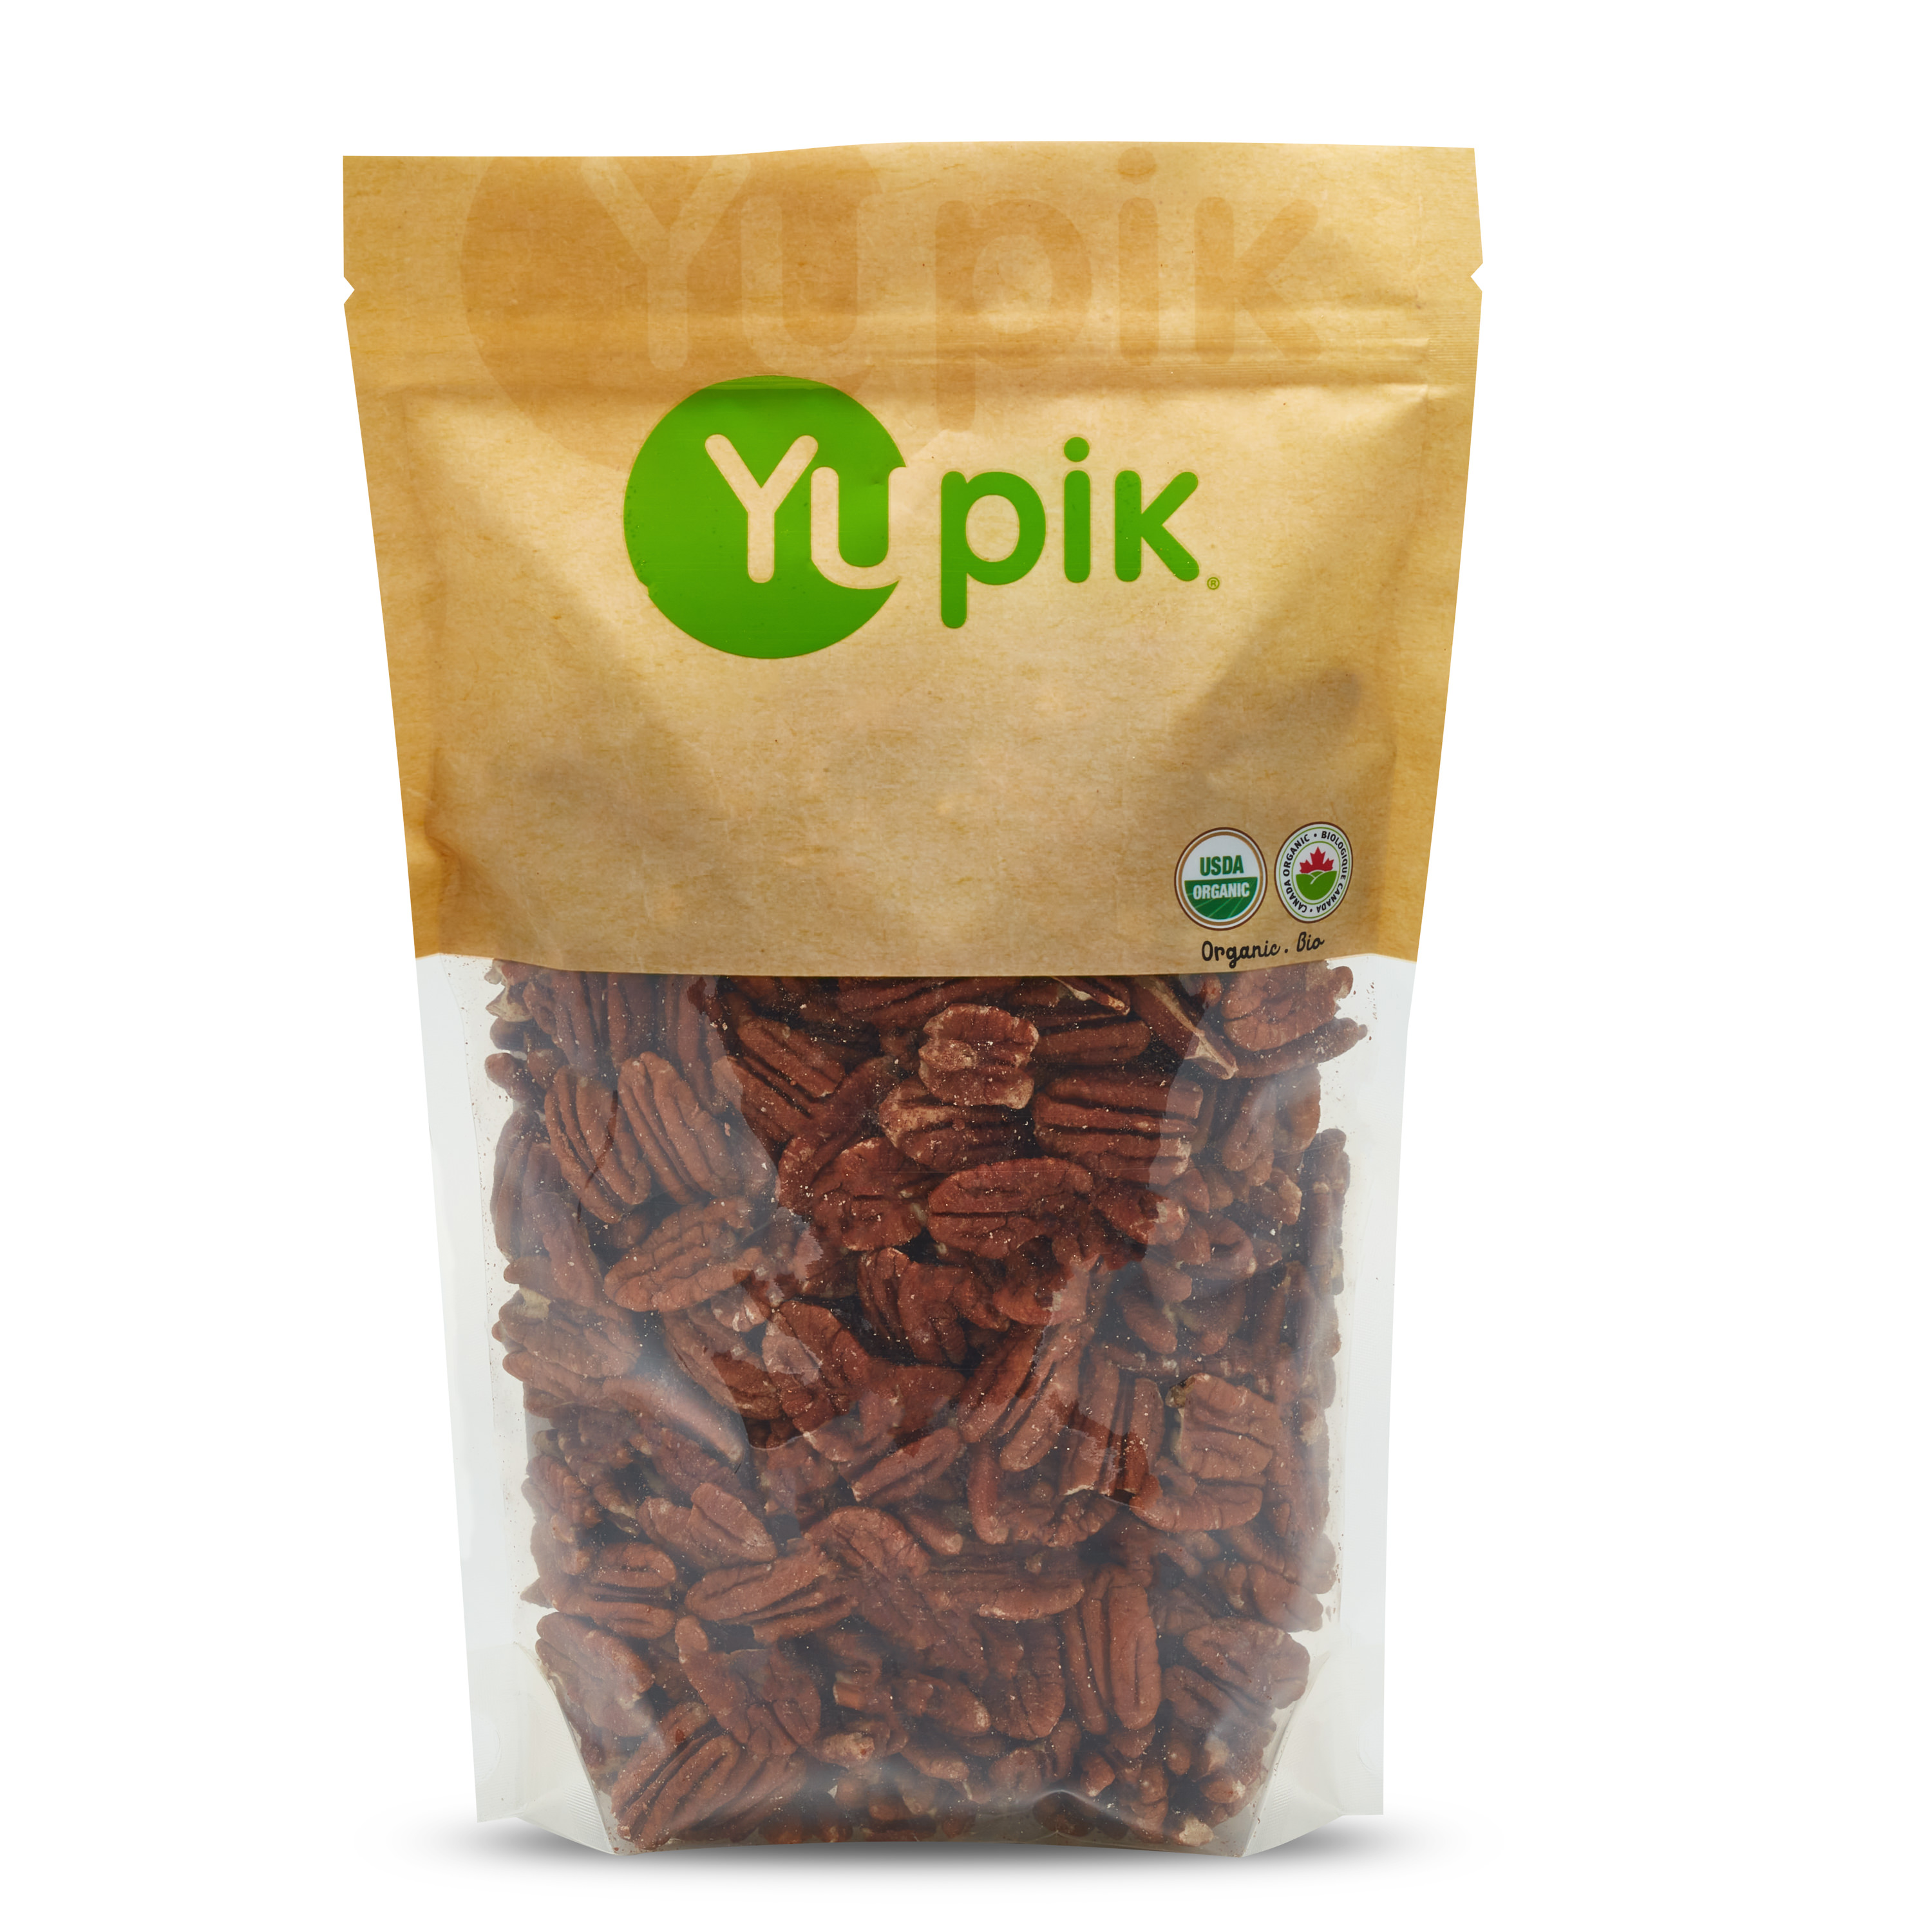 Organic pecans.This product may contain small shell pieces